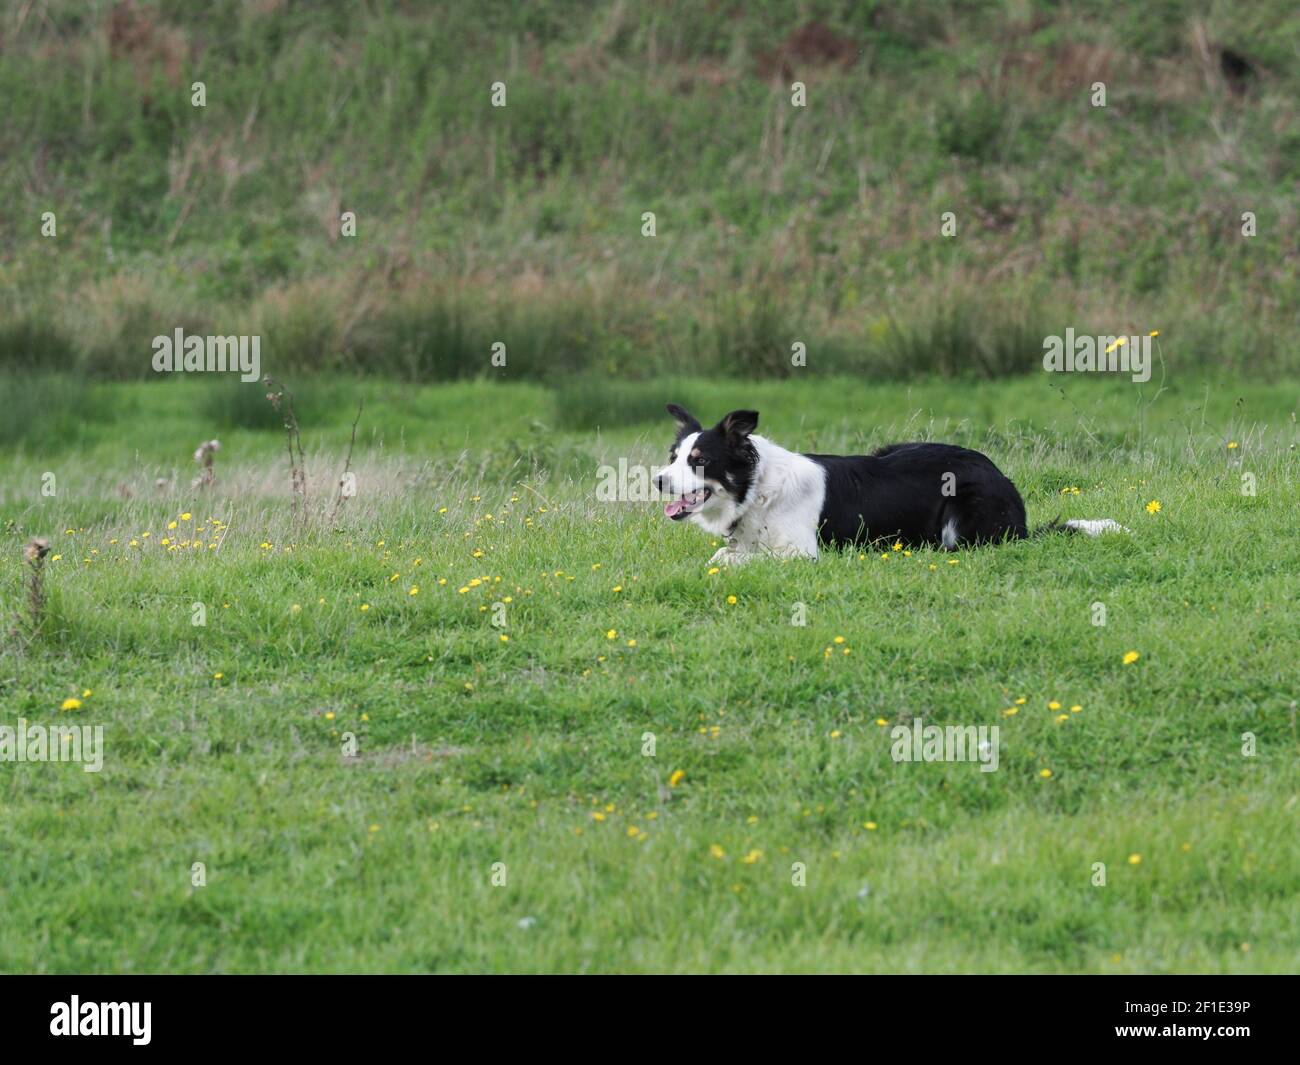 A working sheep dog moves a large flock of sheep through a field. Stock Photo